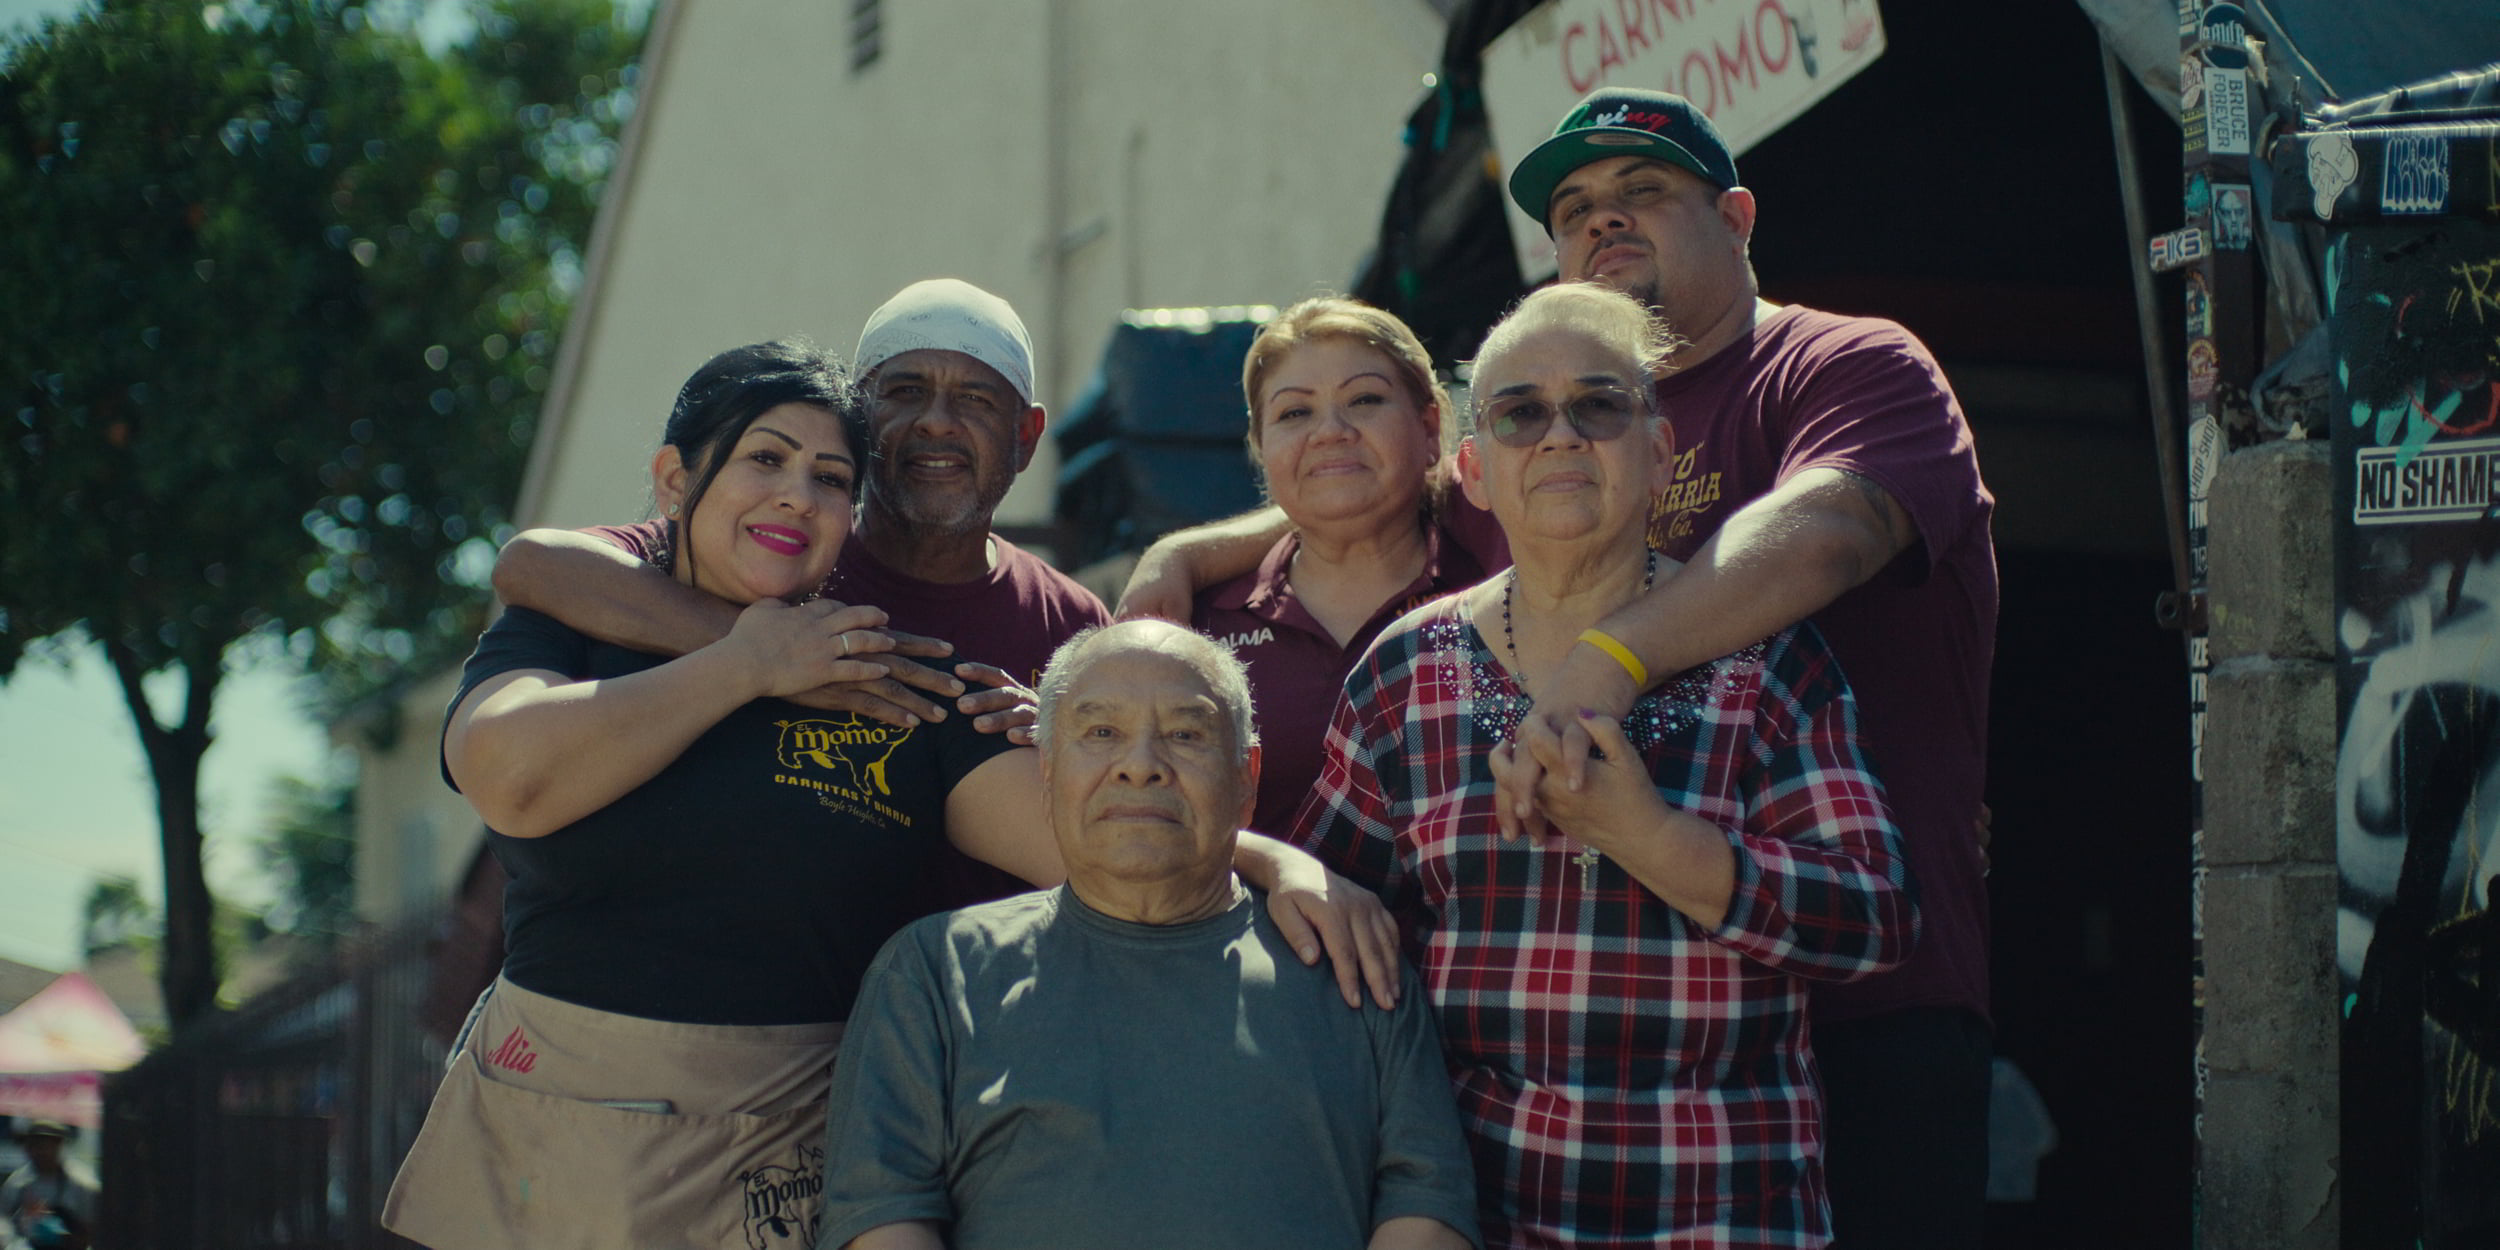 Street Food: USA. Juan Carlos "Billy" Acosta (right) and family in 'Street Food: USA'. Cr. Courtesy of Netflix © 2022